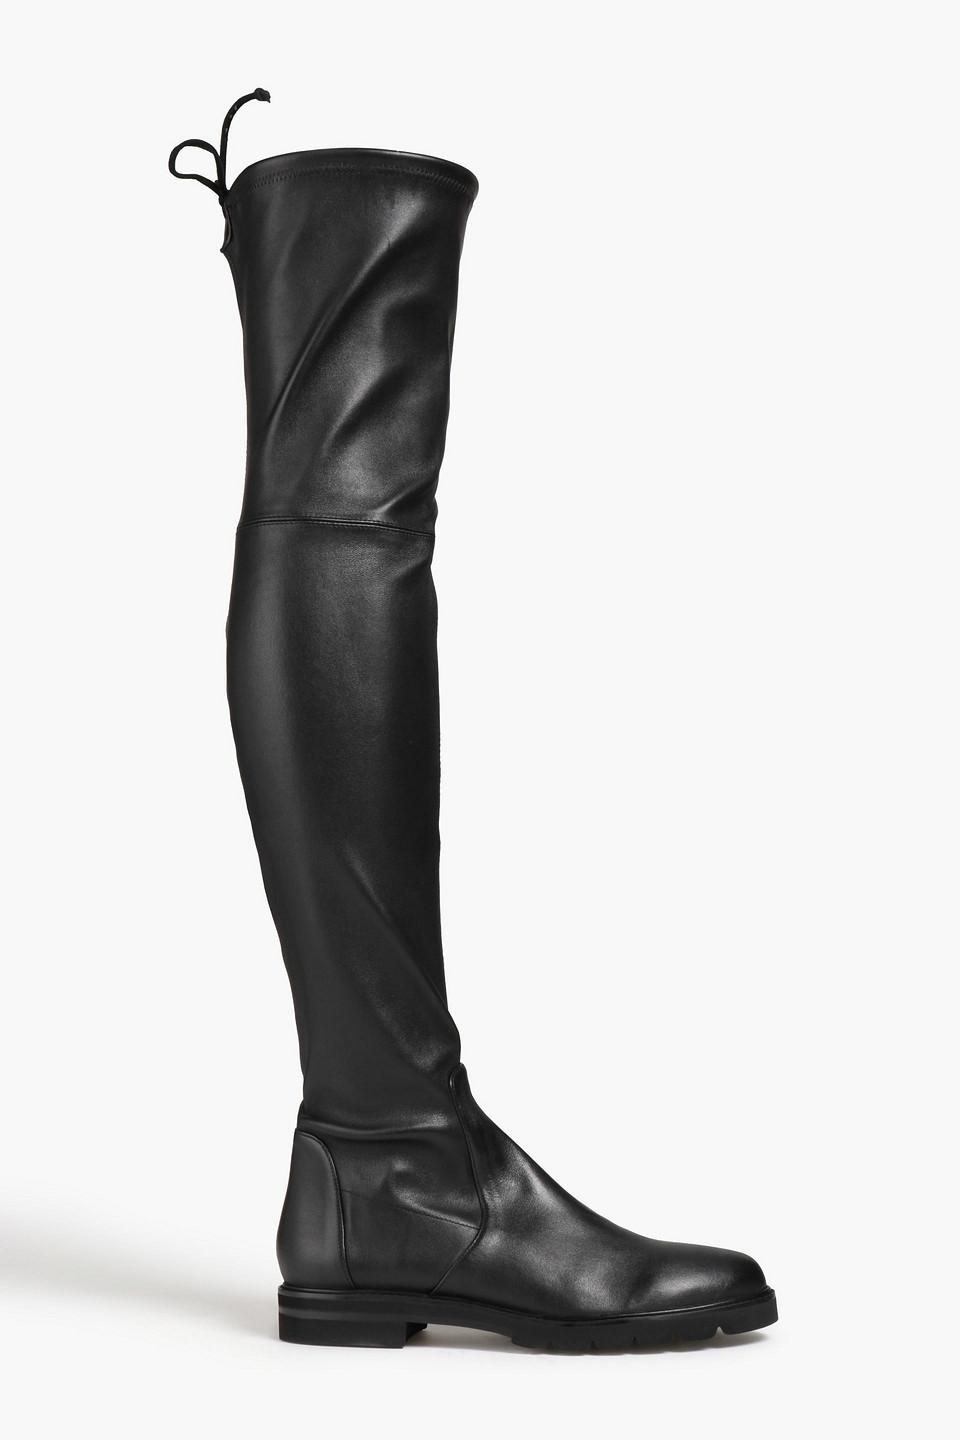 Stuart Weitzman City Leather Thigh Boots in Black | Lyst